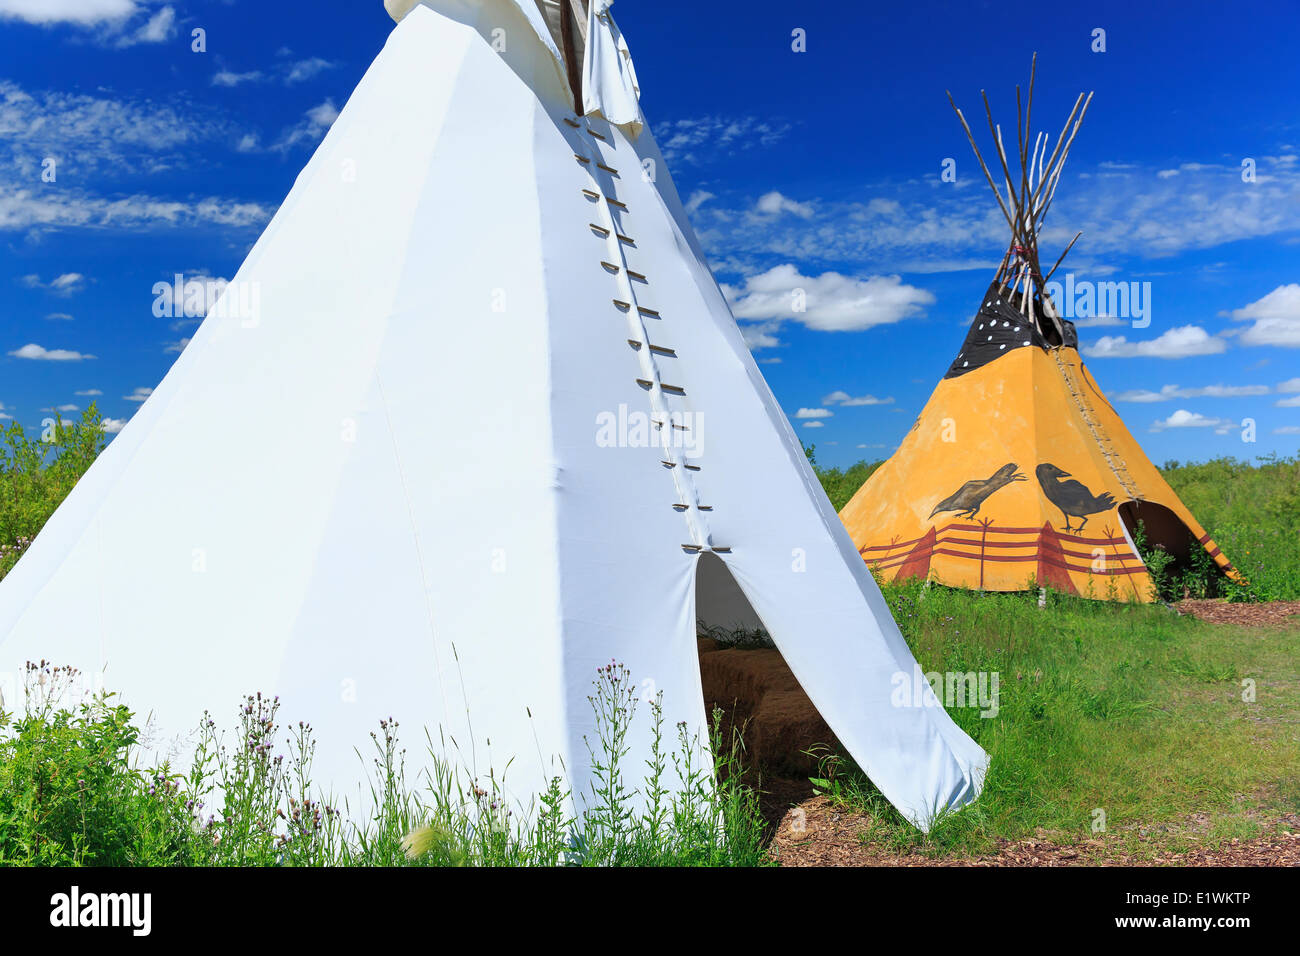 Teepees at Fort Whyte, Winnipeg, Manitoba, Canada Stock Photo